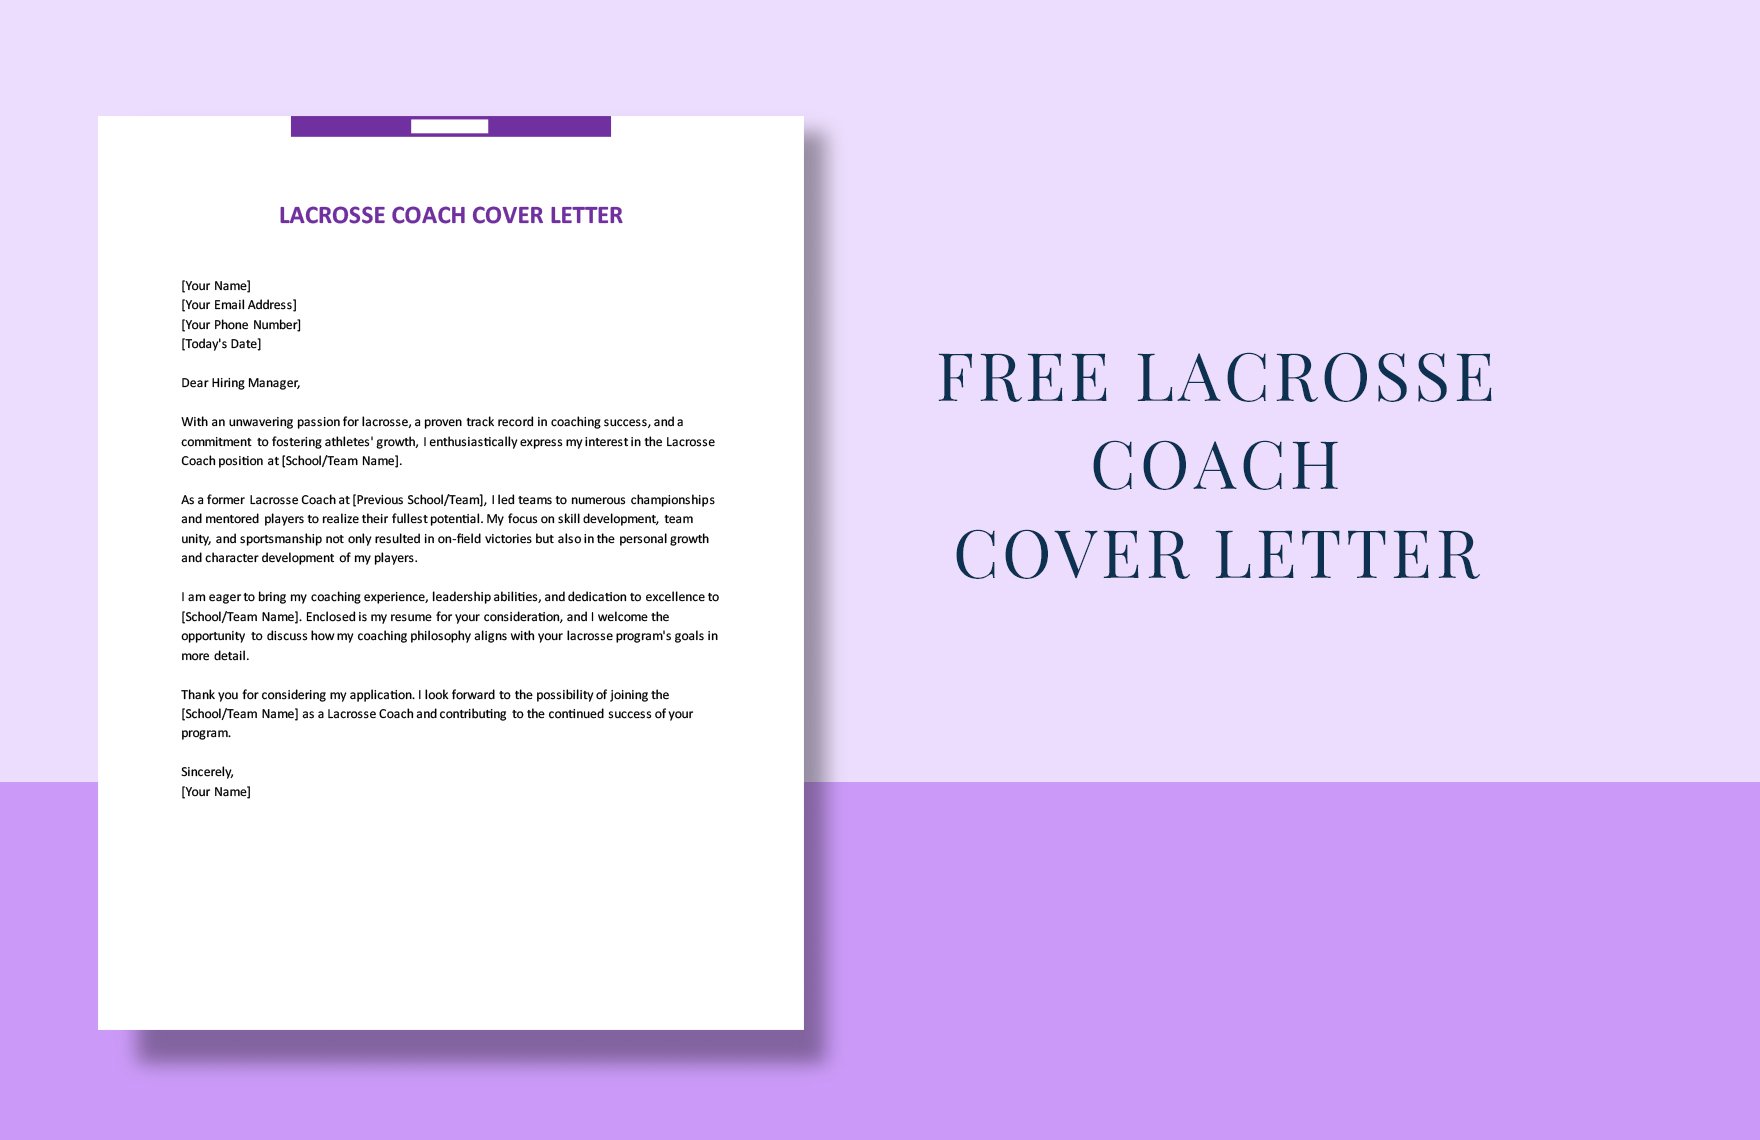 Lacrosse Coach Cover Letter in Word, Google Docs, PDF